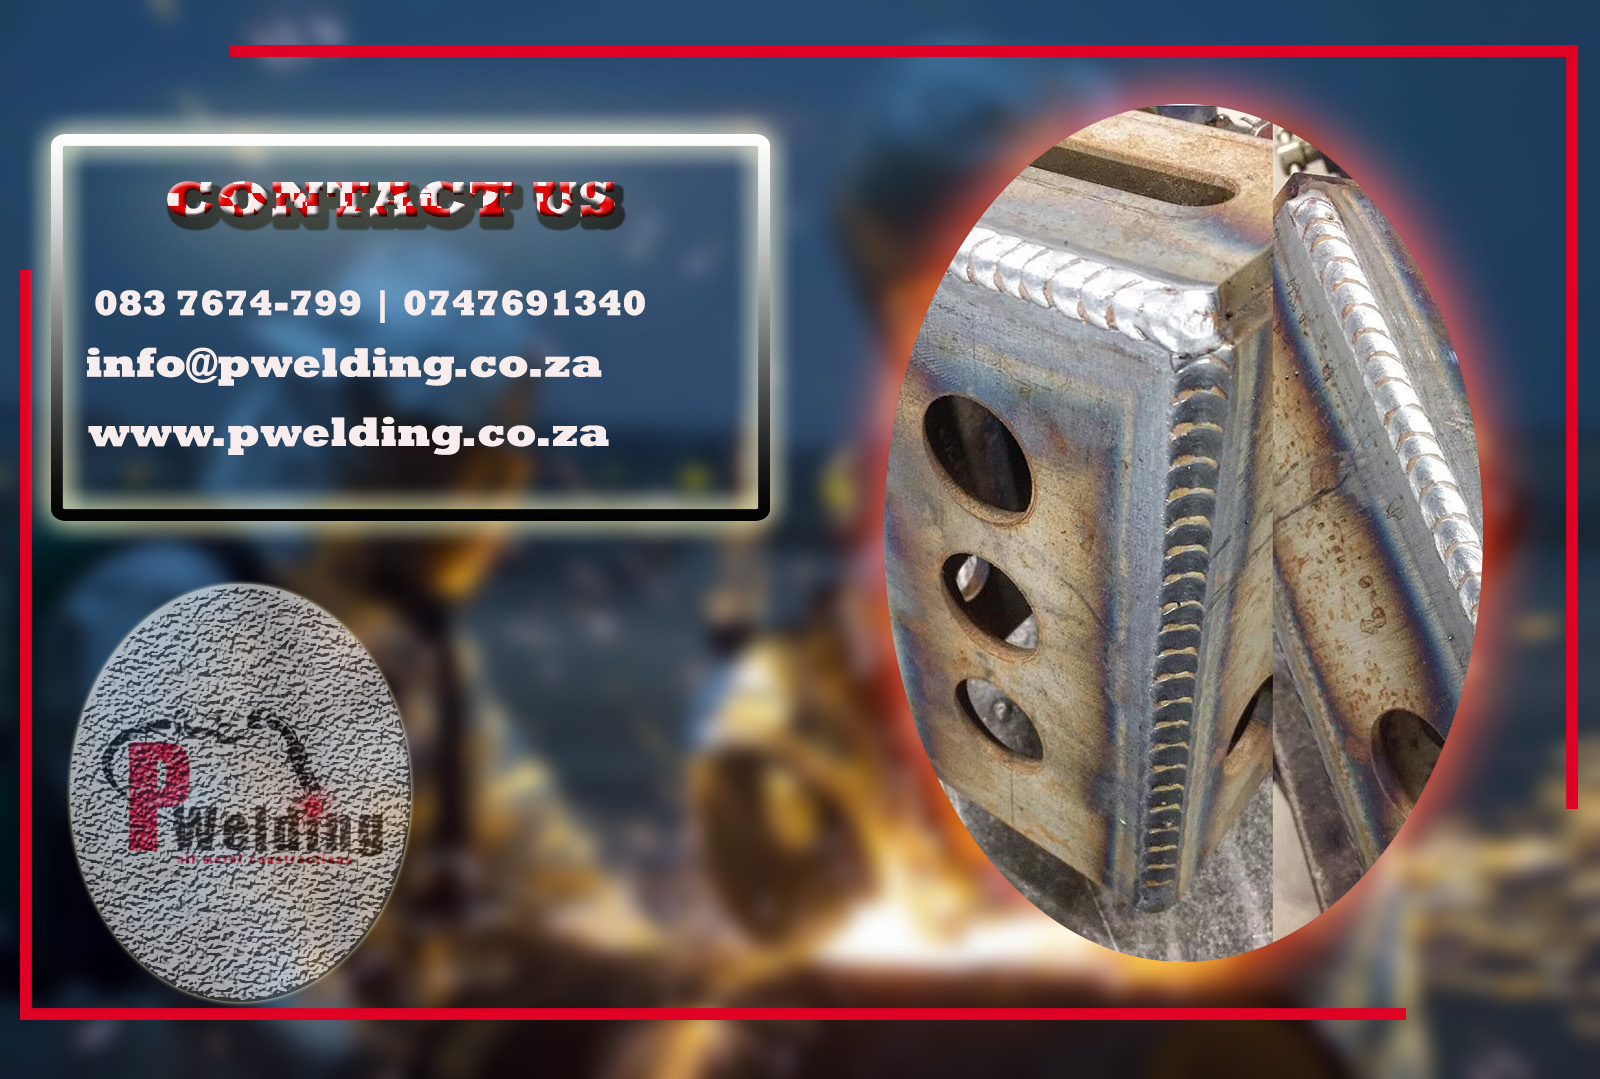 We provide a comprehensive stainless steel mig wire Johannesburg  welding services around Johannesburg. And we are able to assist with your specific requirements.